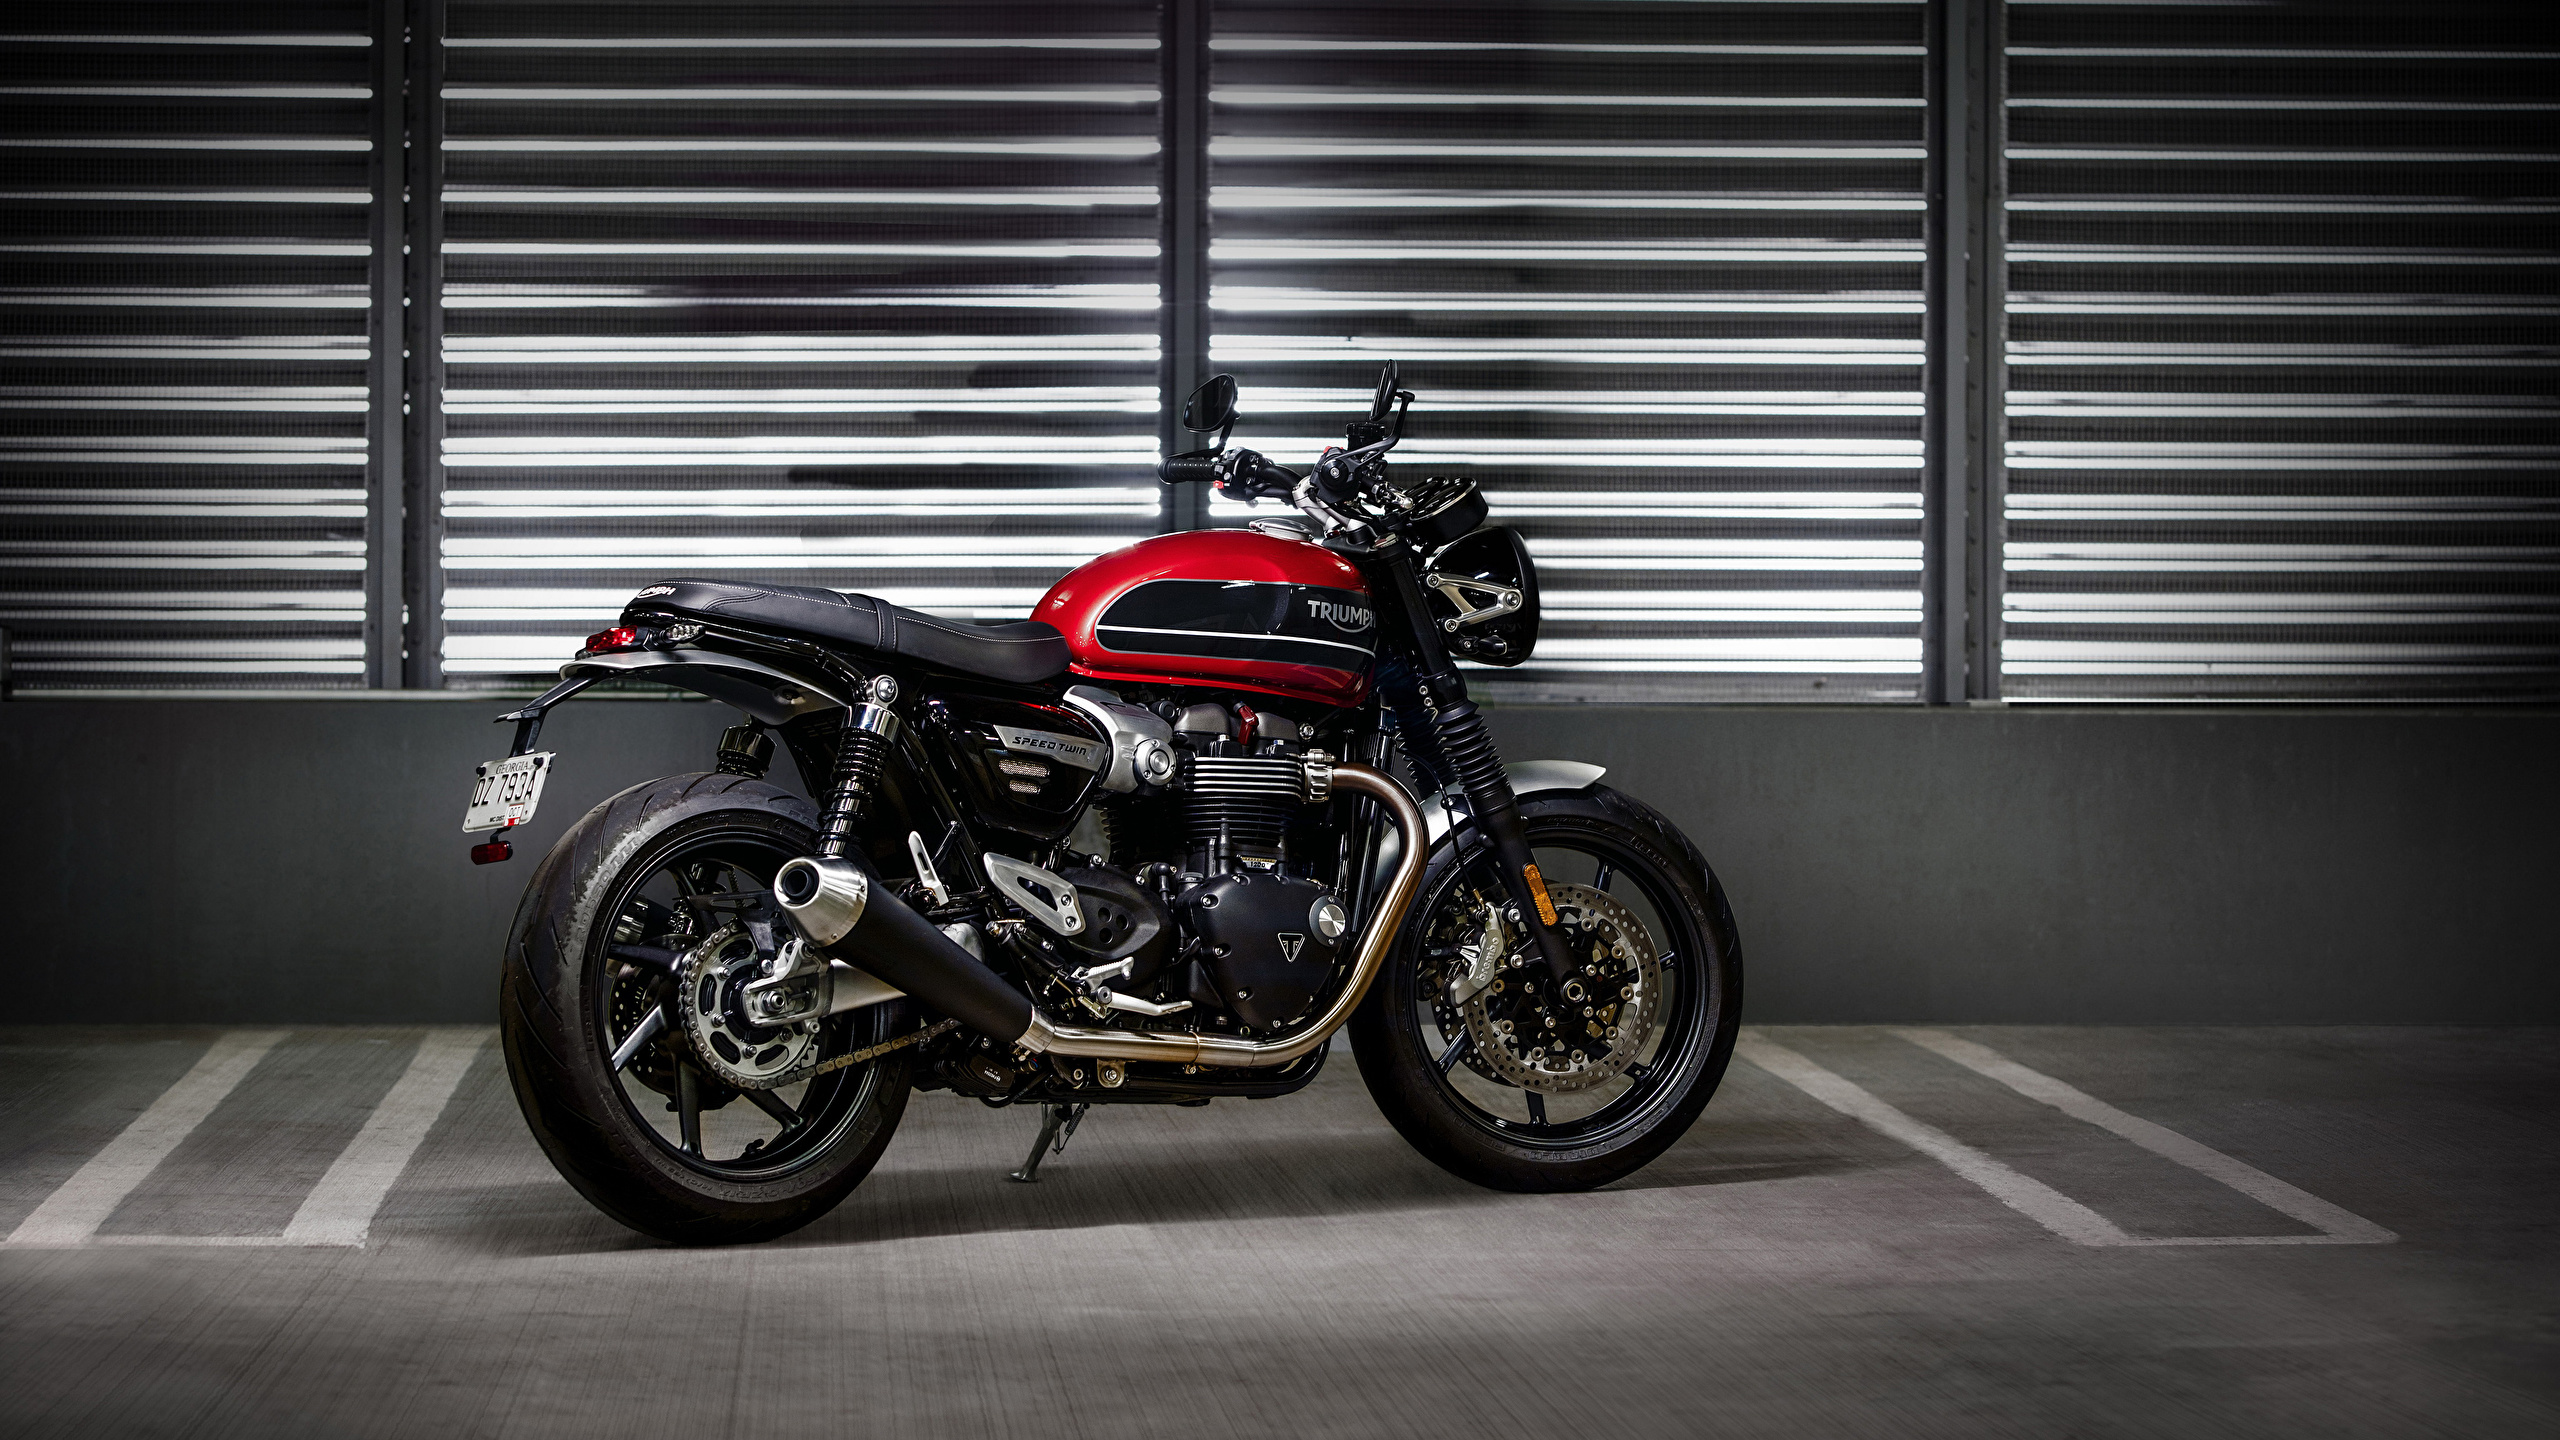 Photos Triumph Motorcycles Ltd 2019 Speed Twin Motorcycles